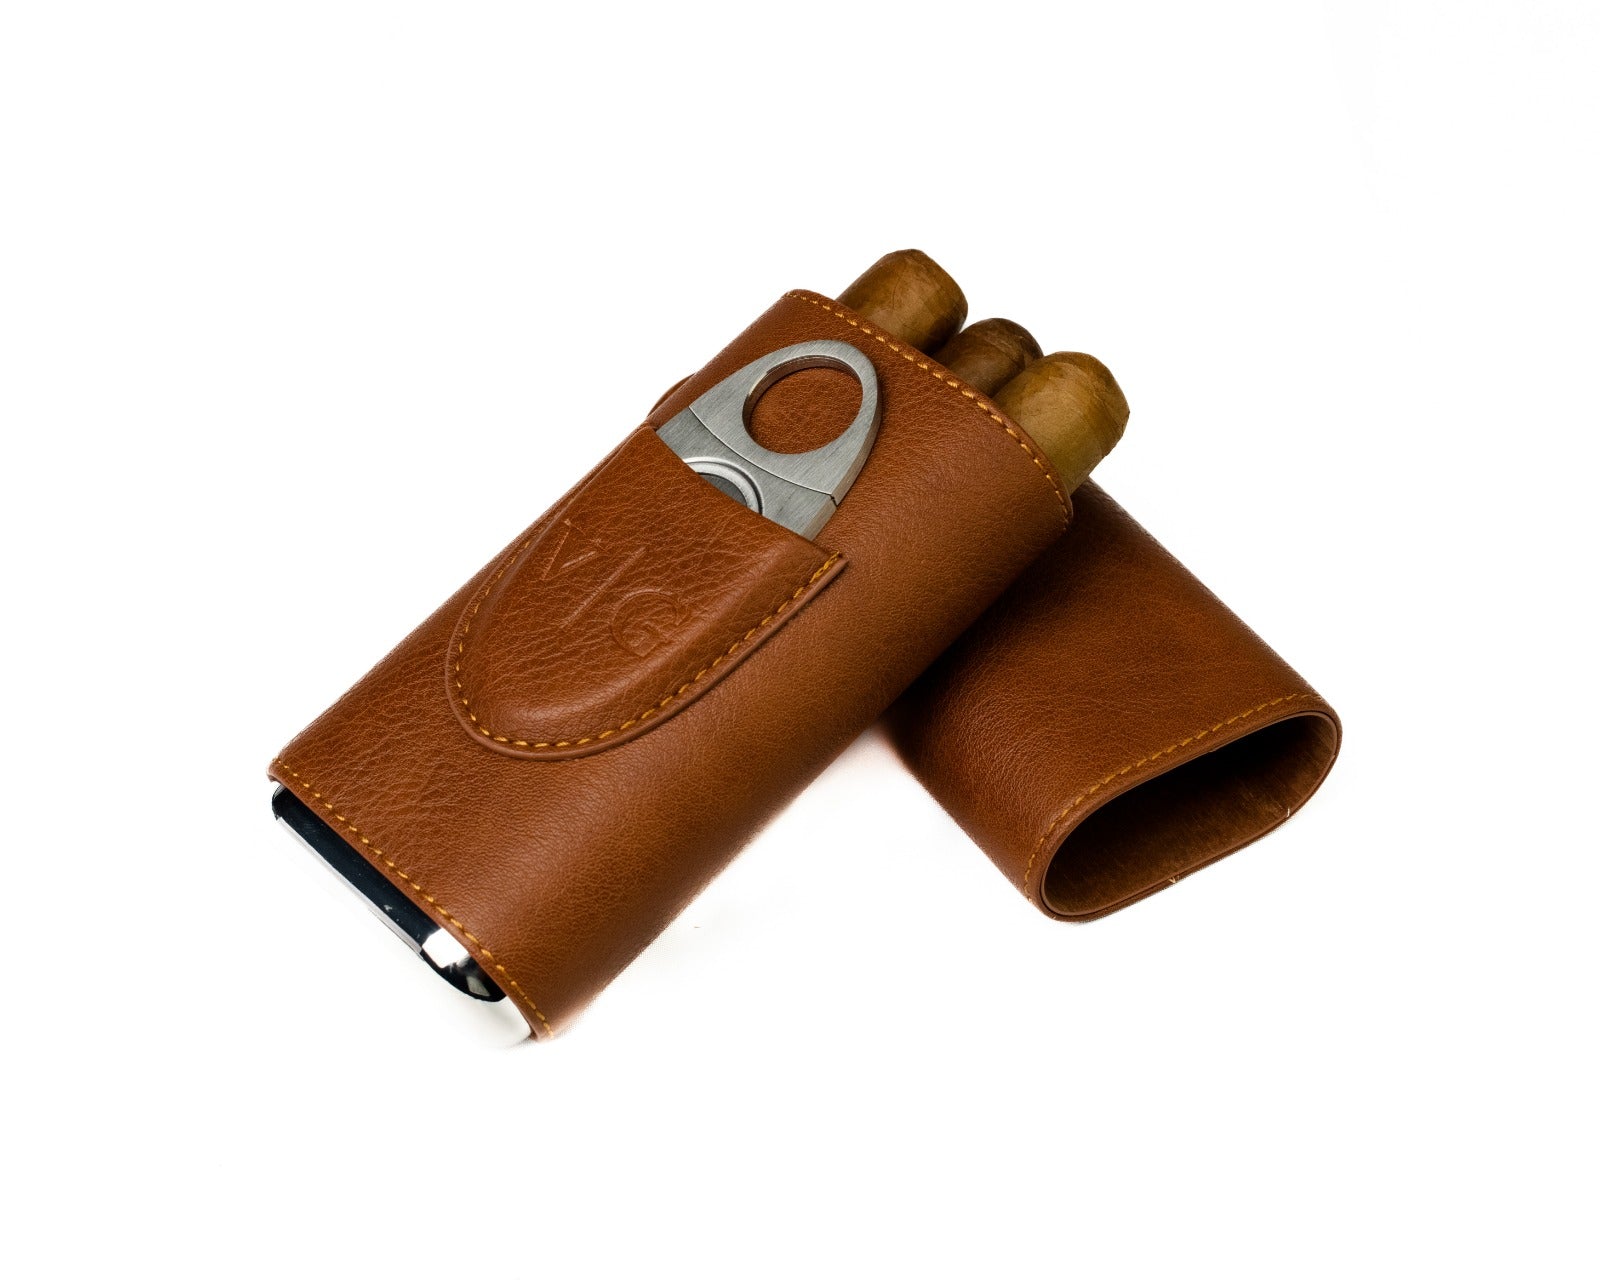 Travel Sized Personalize Leather Cigar Case with Cigar Cutter , Groomsman Cigar Case, Best Man Gift (Brown)